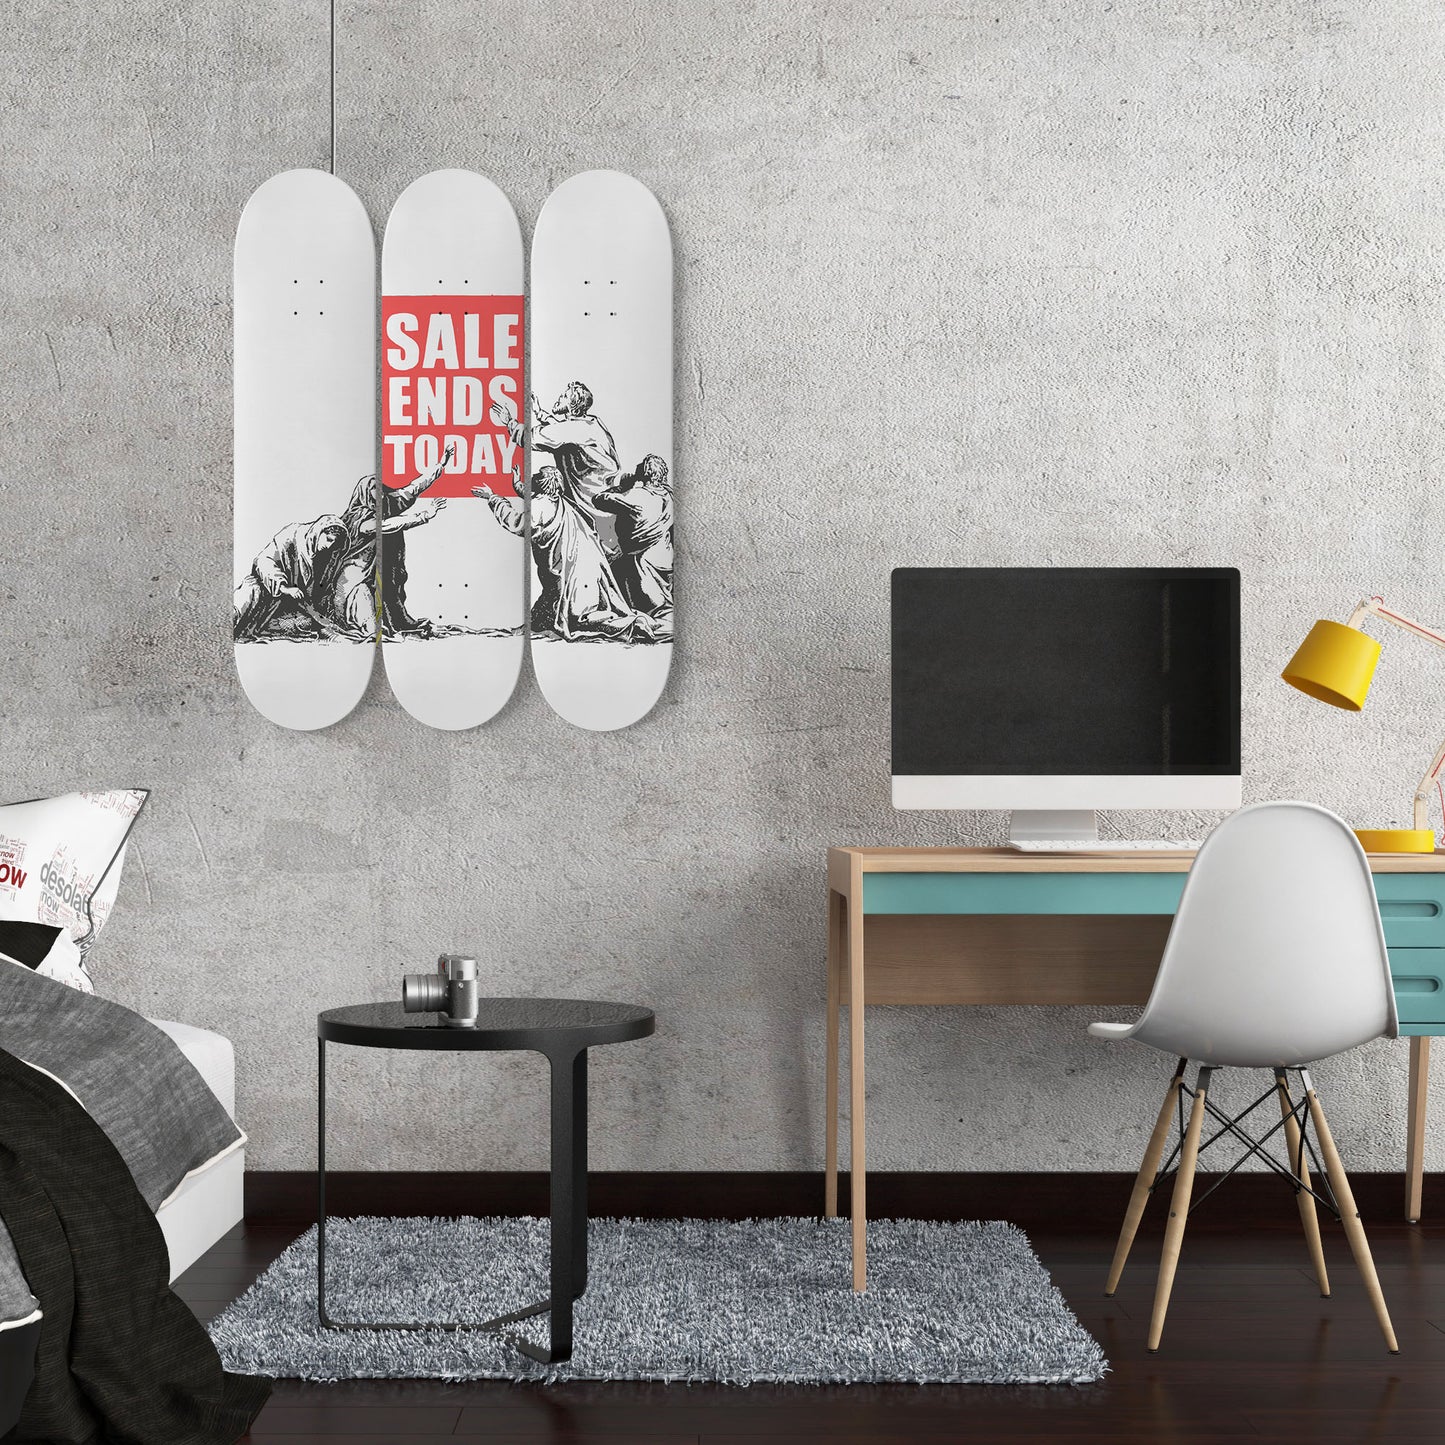 Banksy Sales Ends Today | 3 Set of Skateboard Deck Wall Art, Hanged Room Decoration, Custom Unique Gift